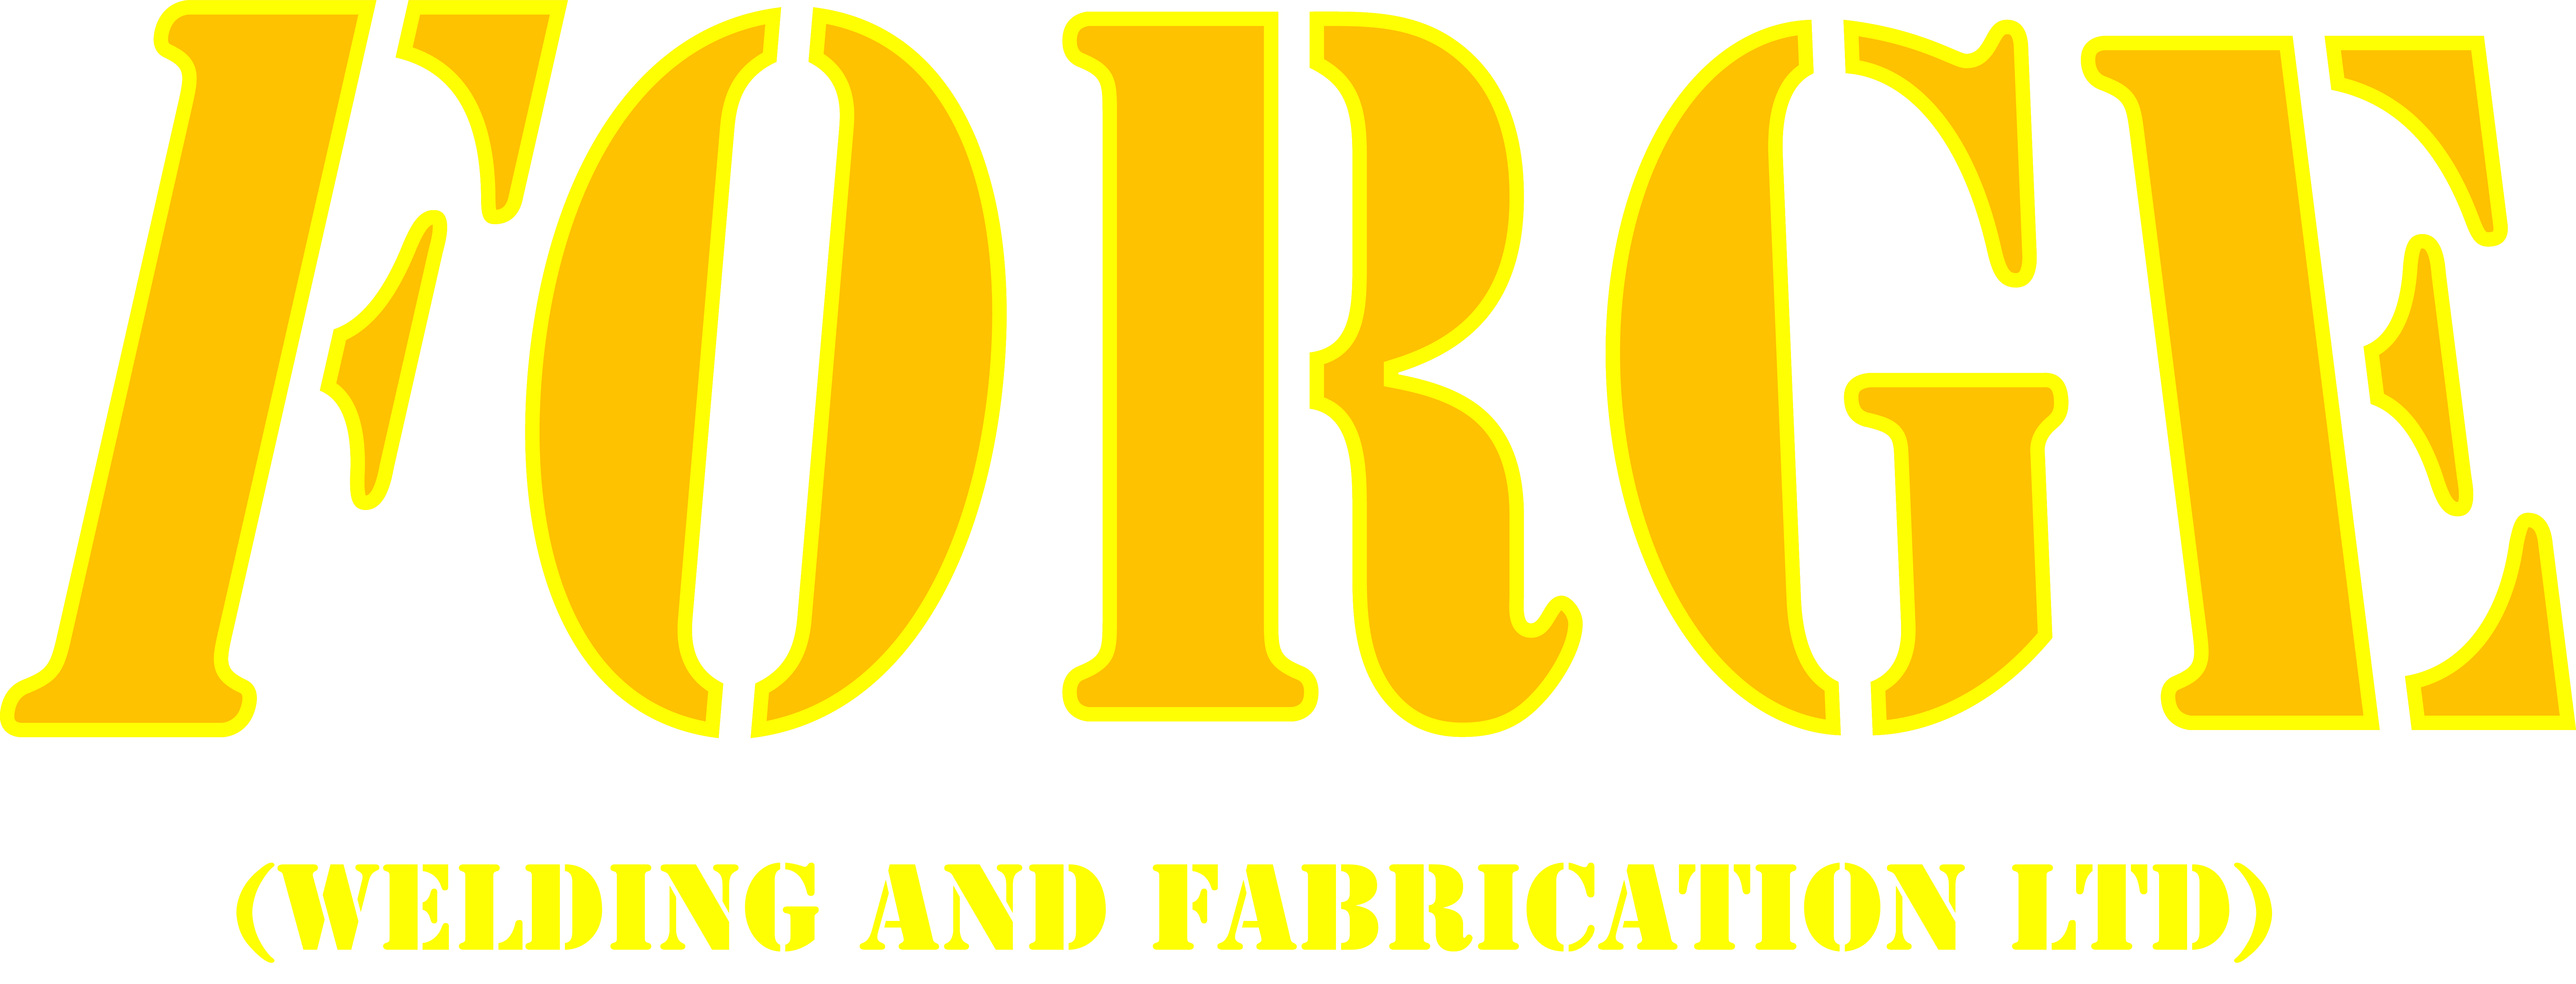 Forge Welding and Fabrication Ltd